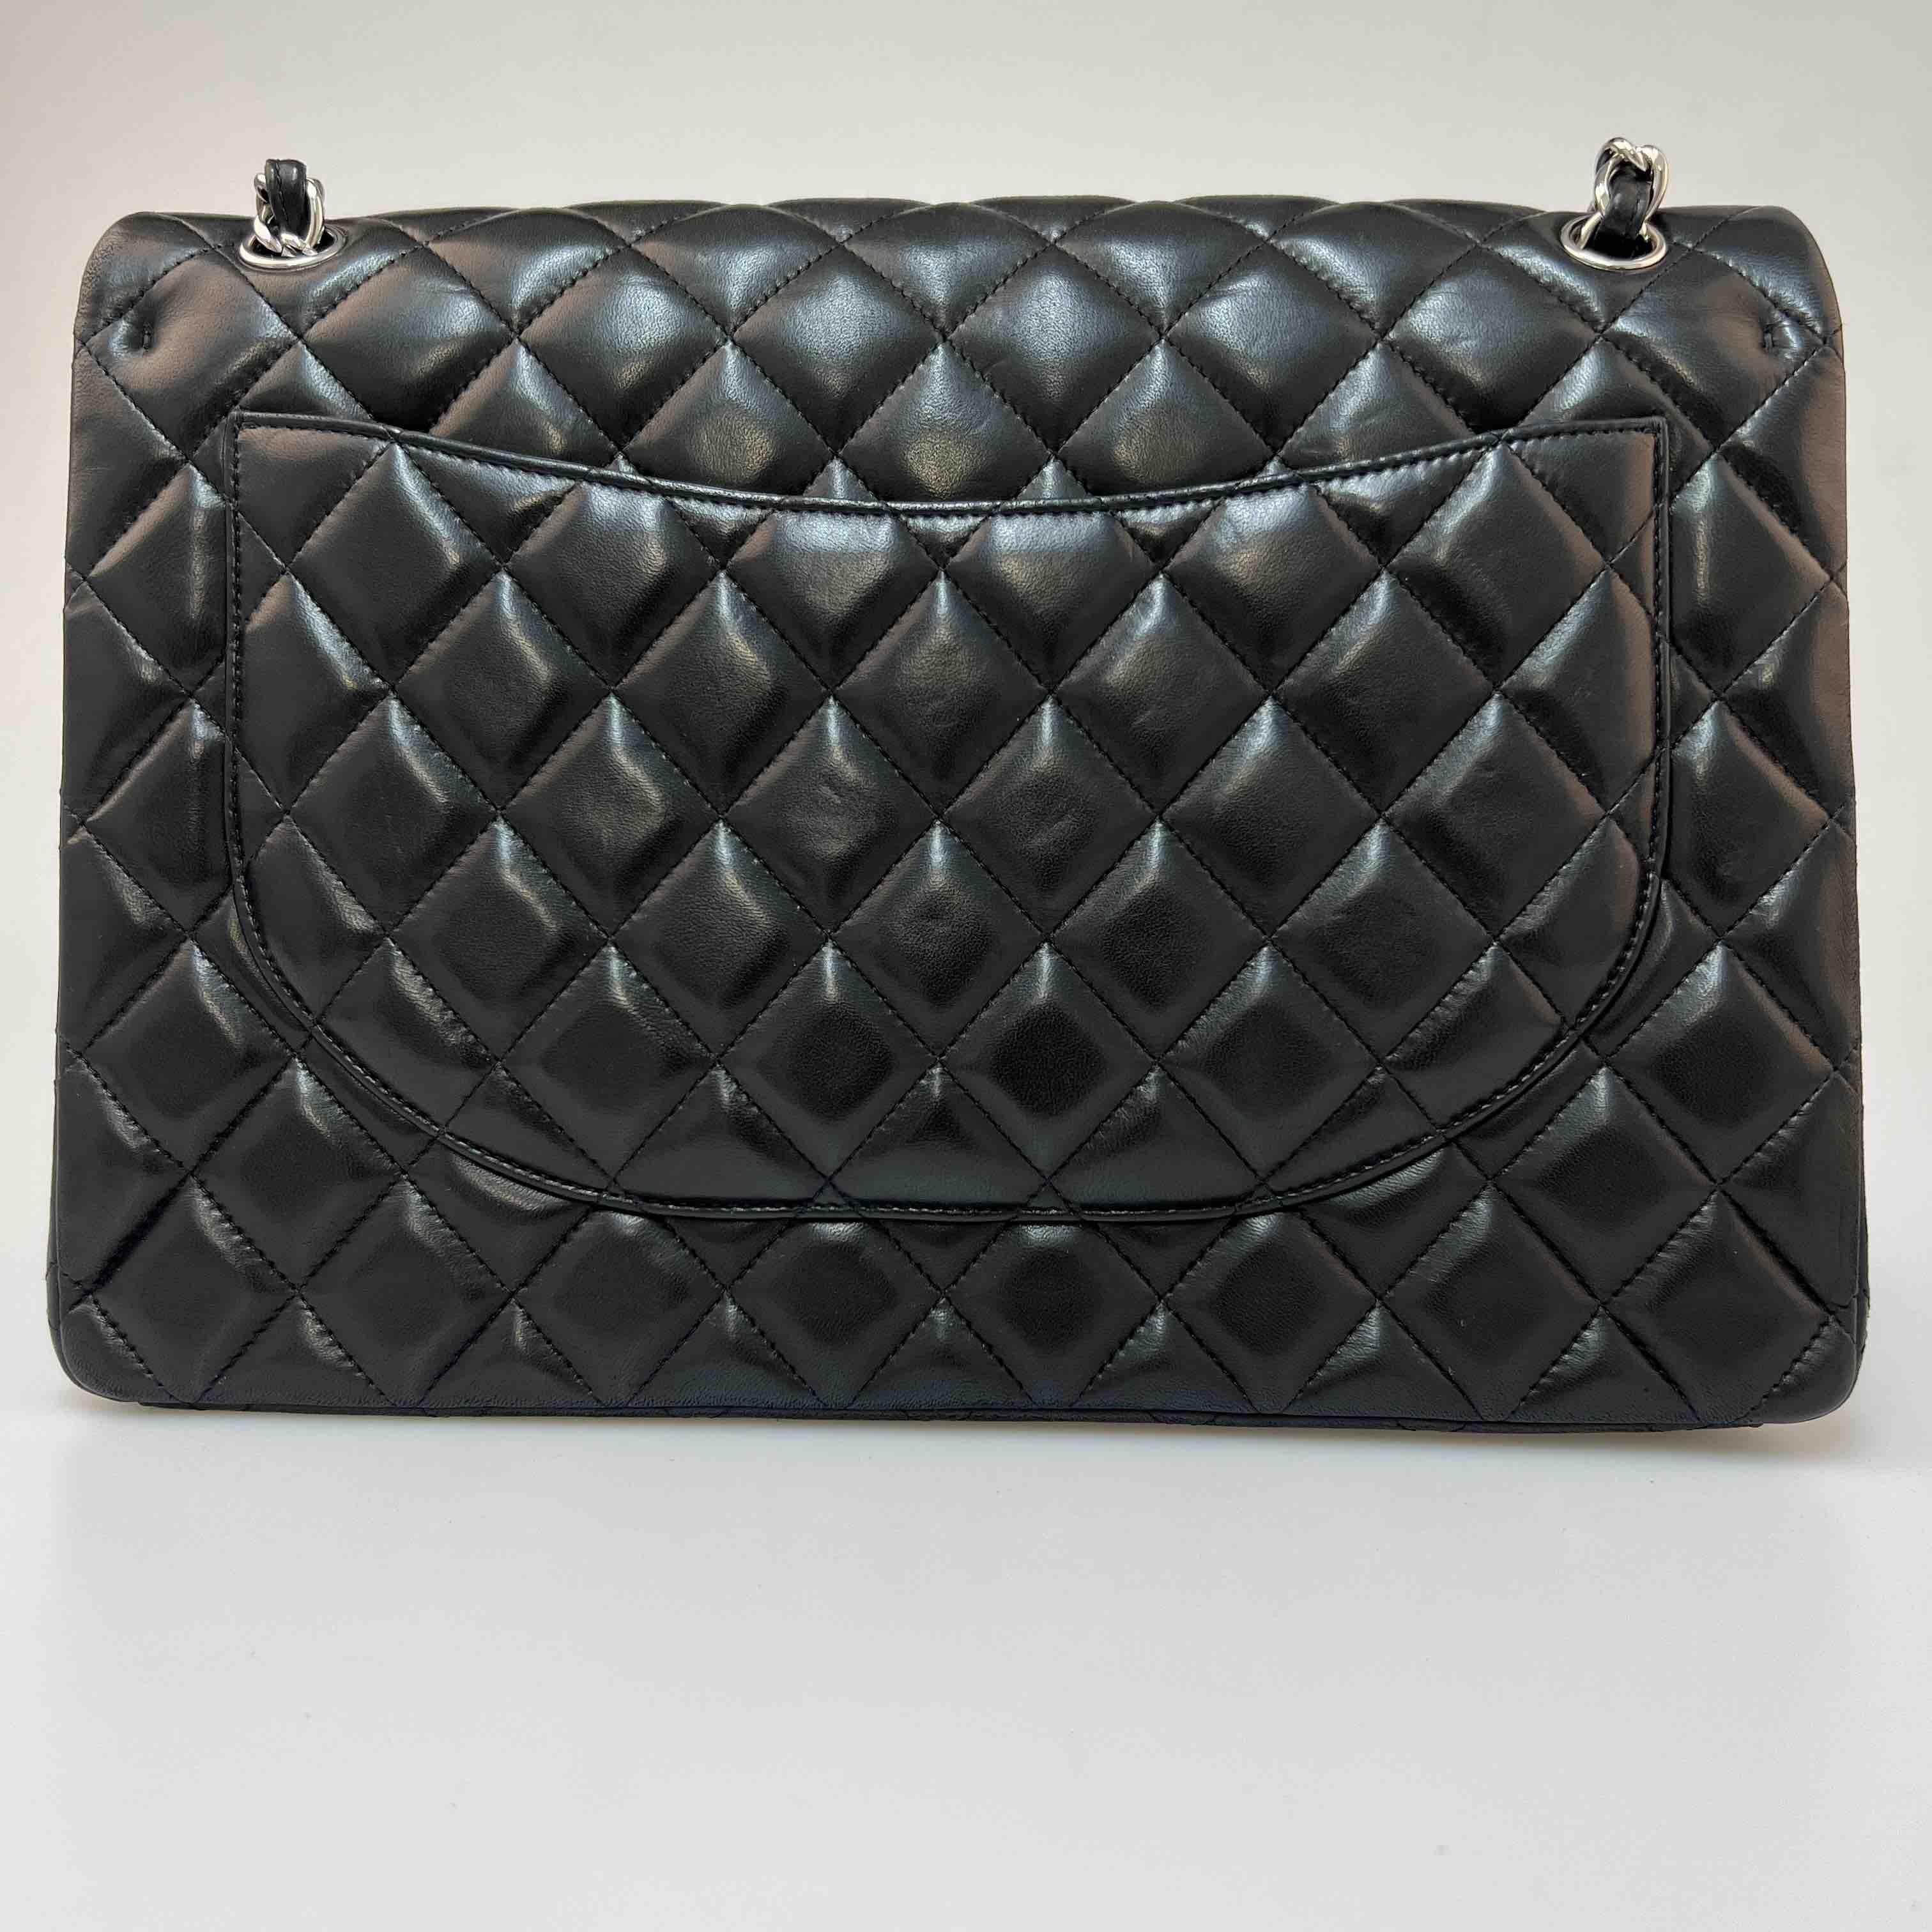 Maxi Jumbo CHANEL in black lamb leather. The hardware is in palladium-plated silver metal.
In very good condition
Country of manufacture: Italy
Dimensions: 33 × 23 × 10cm
Shoulder strap: single 128 cm, double 64 cm
Hologram: 1674 ….Authenticity